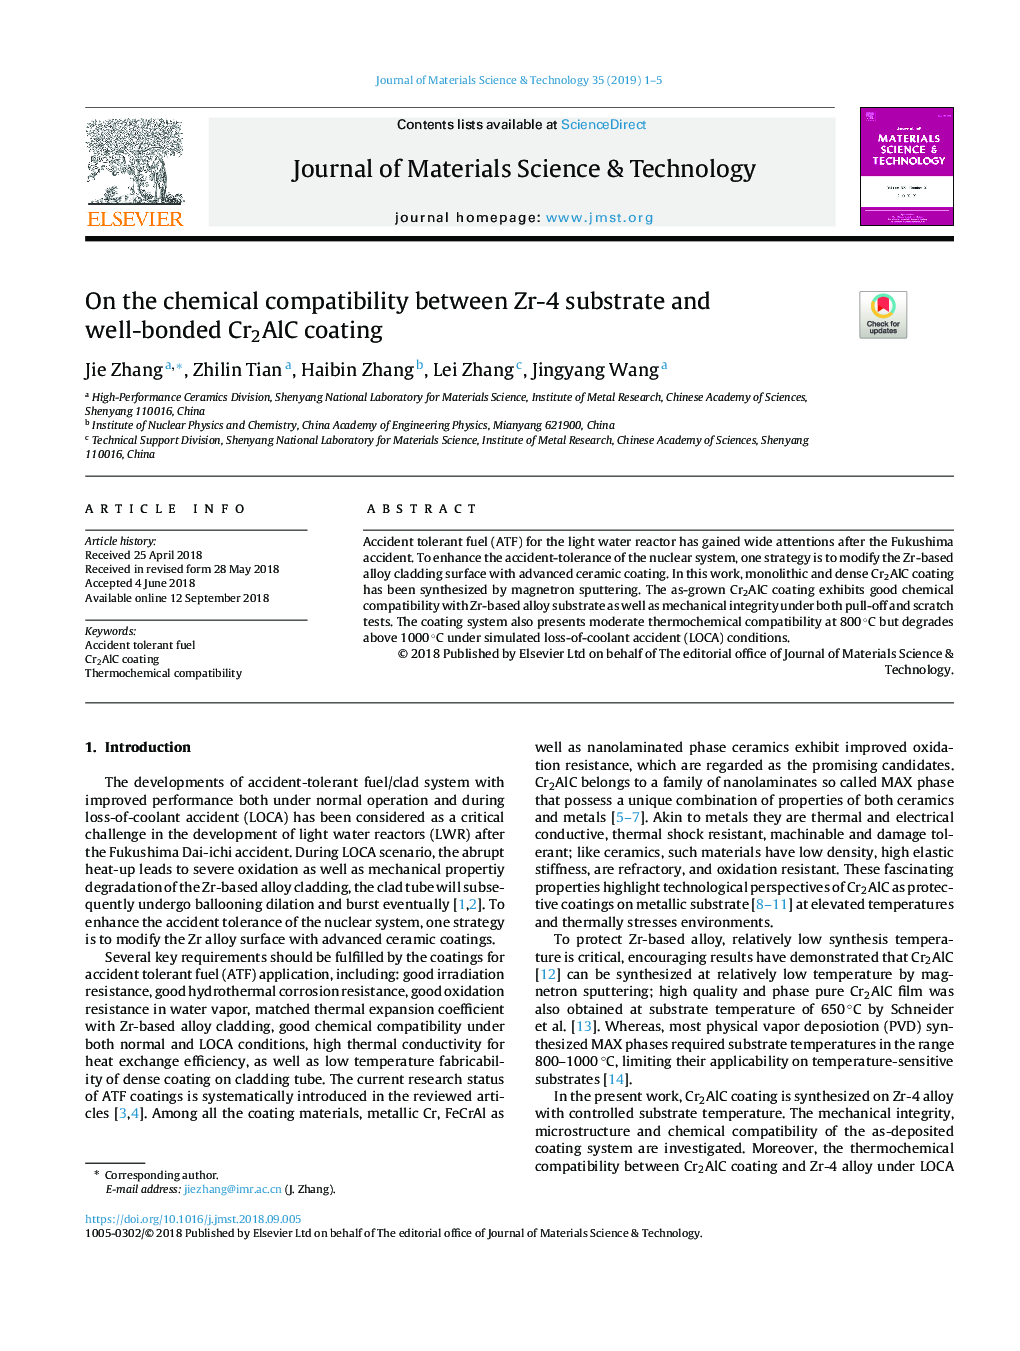 On the chemical compatibility between Zr-4 substrate and well-bonded Cr2AlC coating